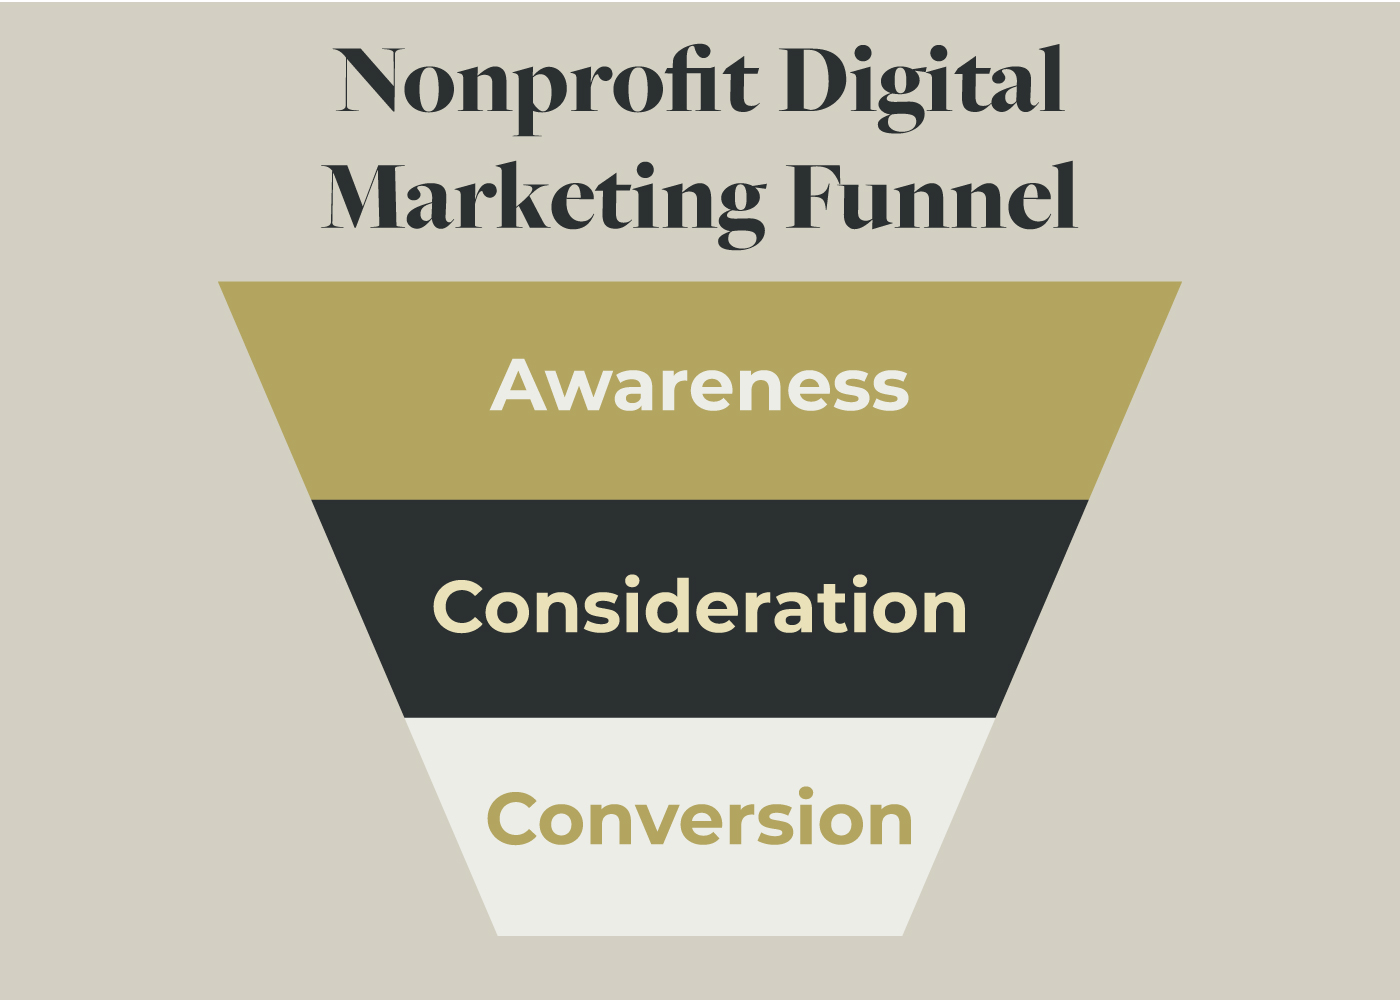 Picture of a marketing funnel - Awareness > Consideration > Conversion